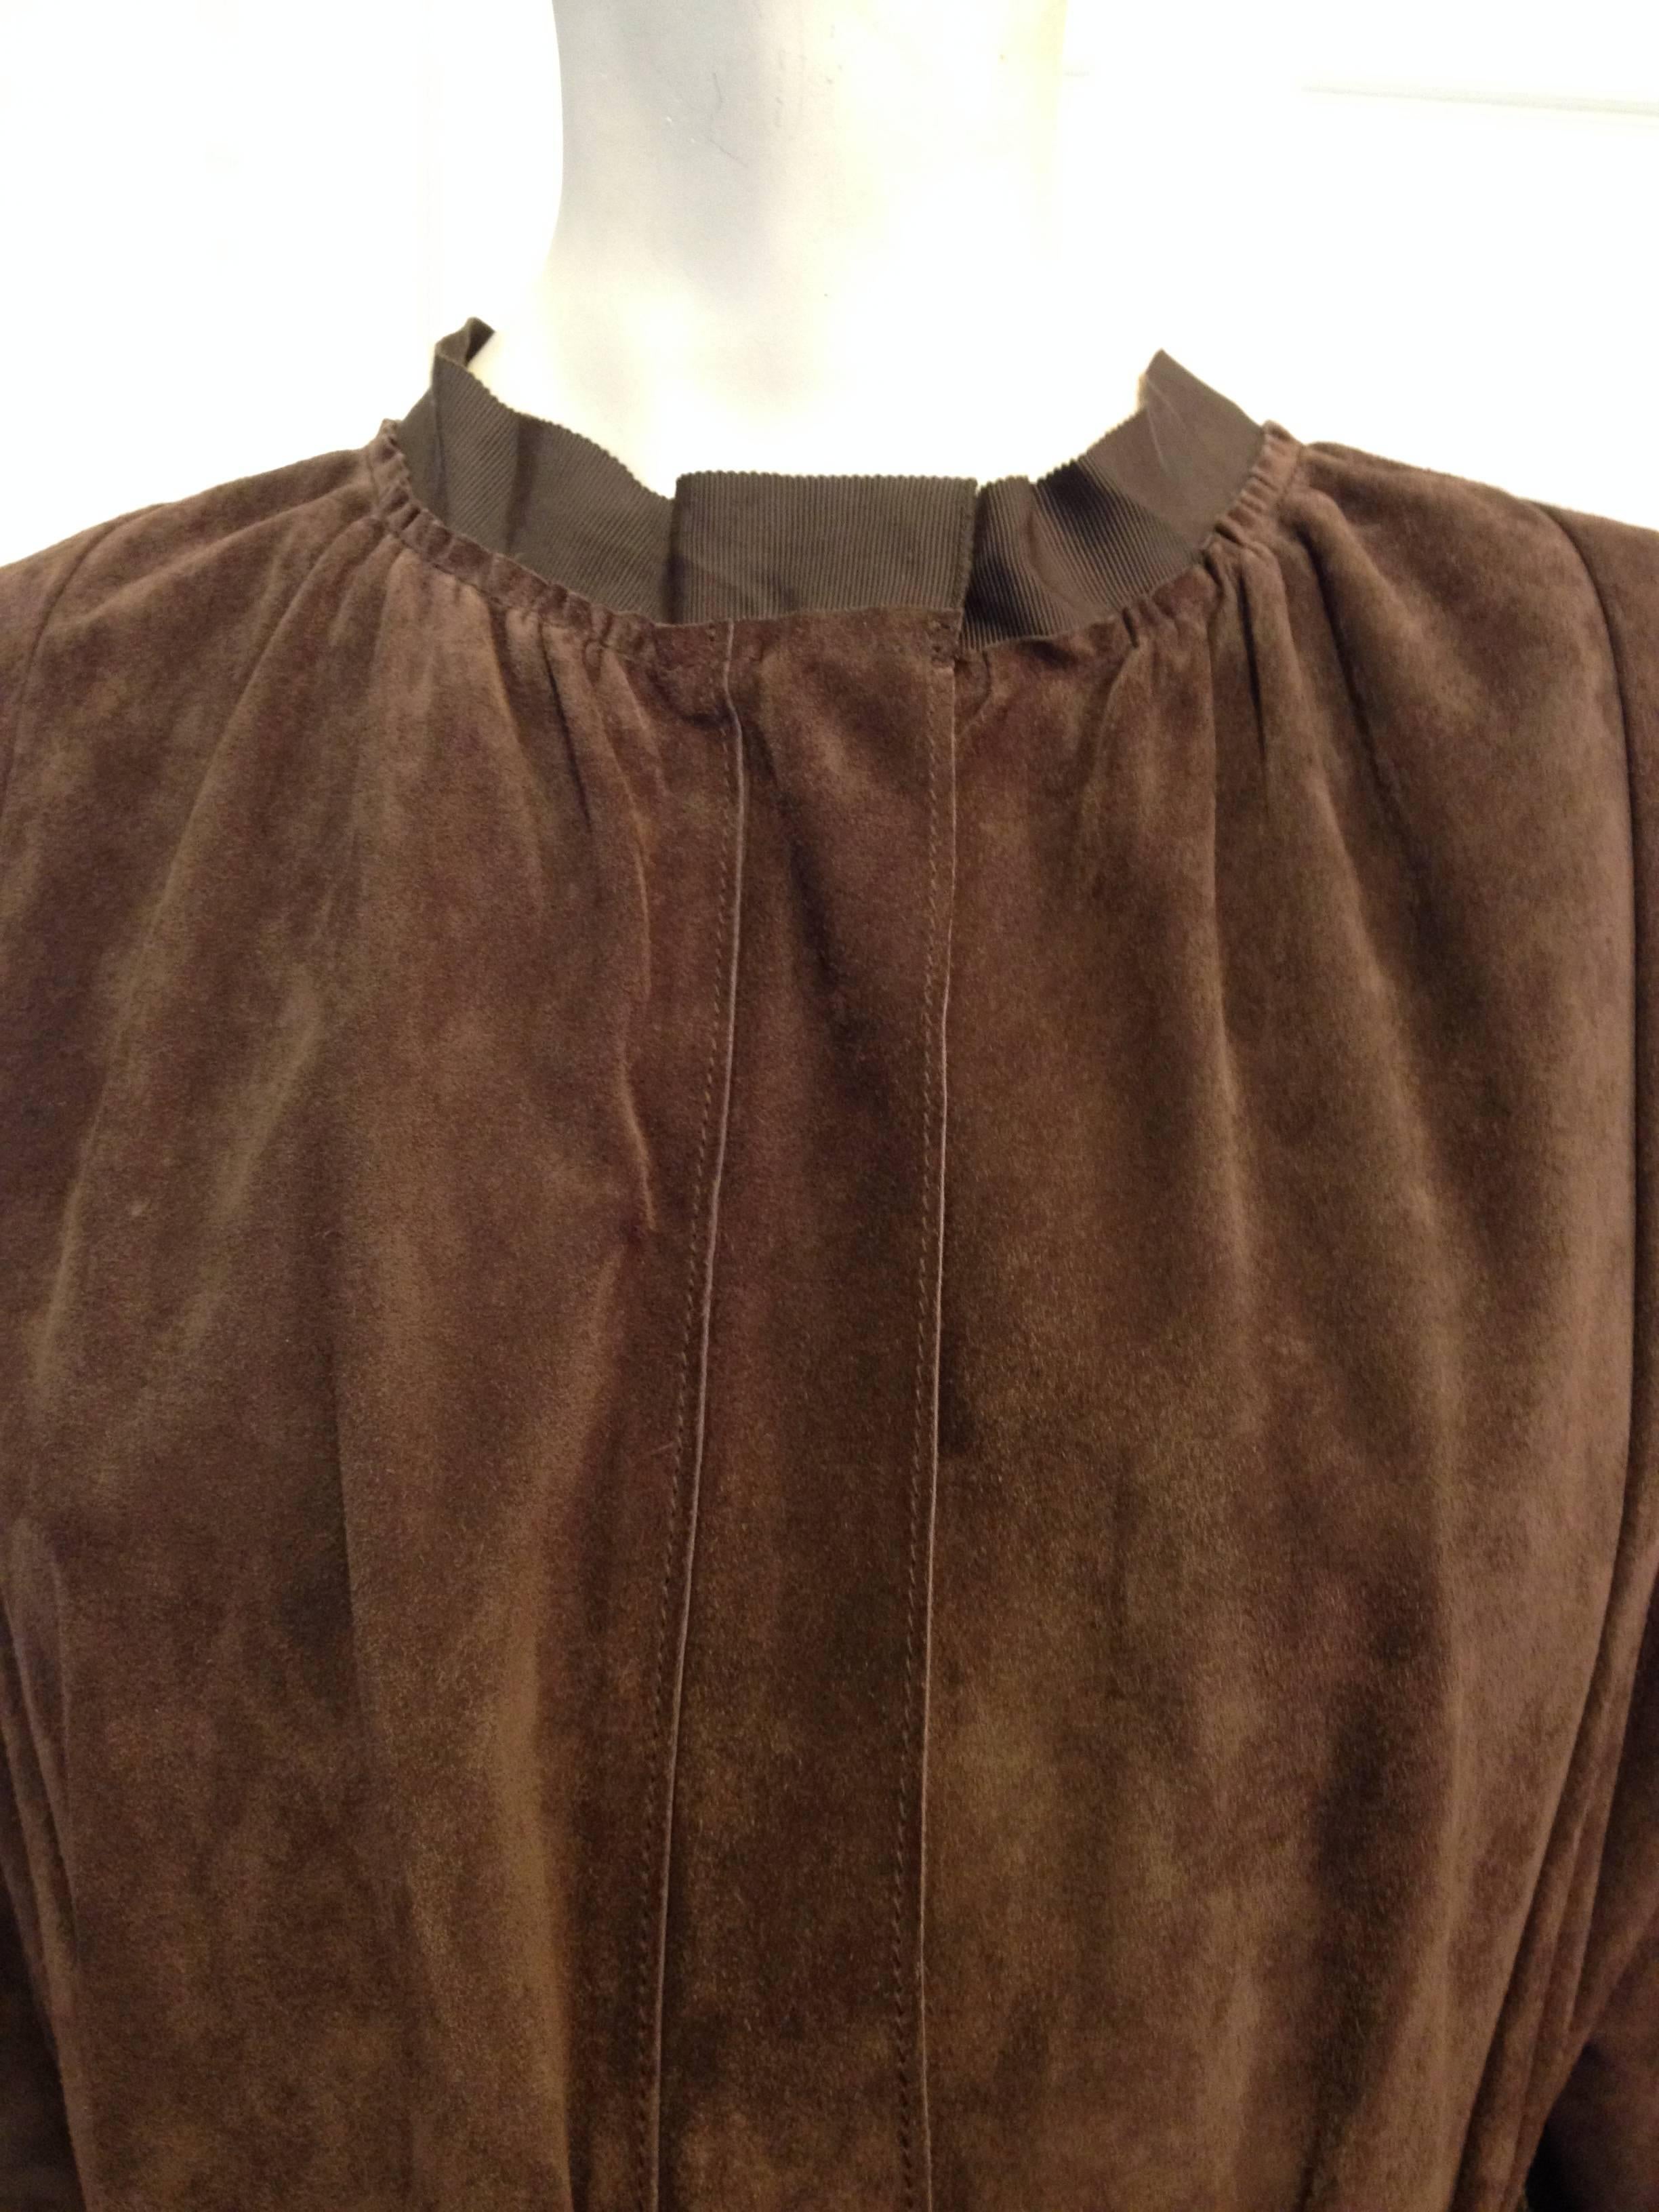 Lanvin Brown Suede Belted Coat Size 38 (6) In Good Condition For Sale In San Francisco, CA